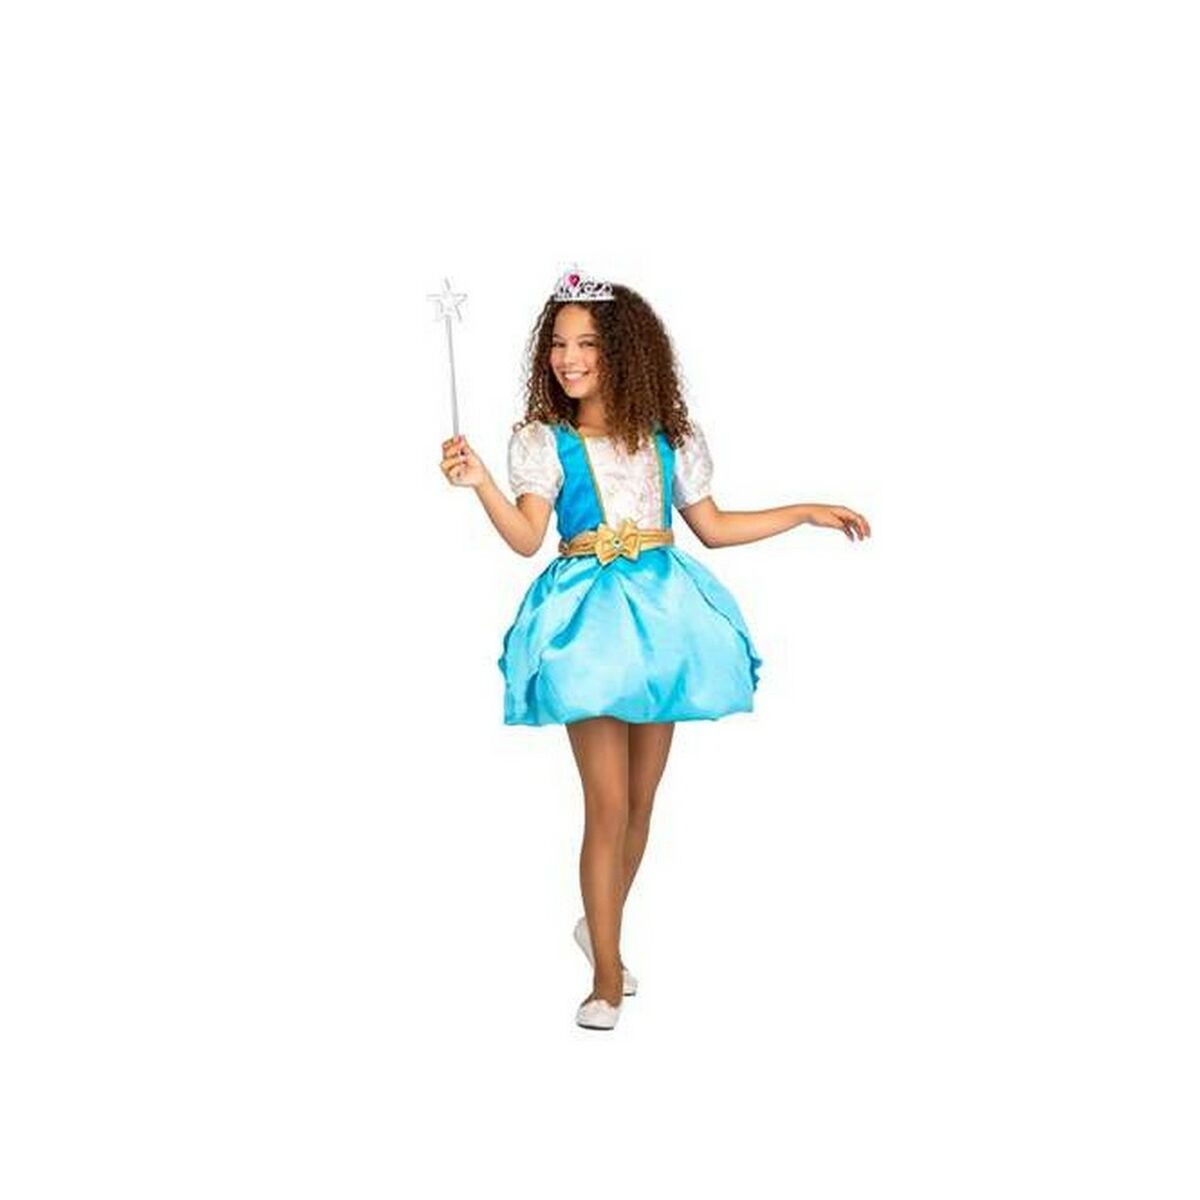 Costume for Children My Other Me Magic Princess